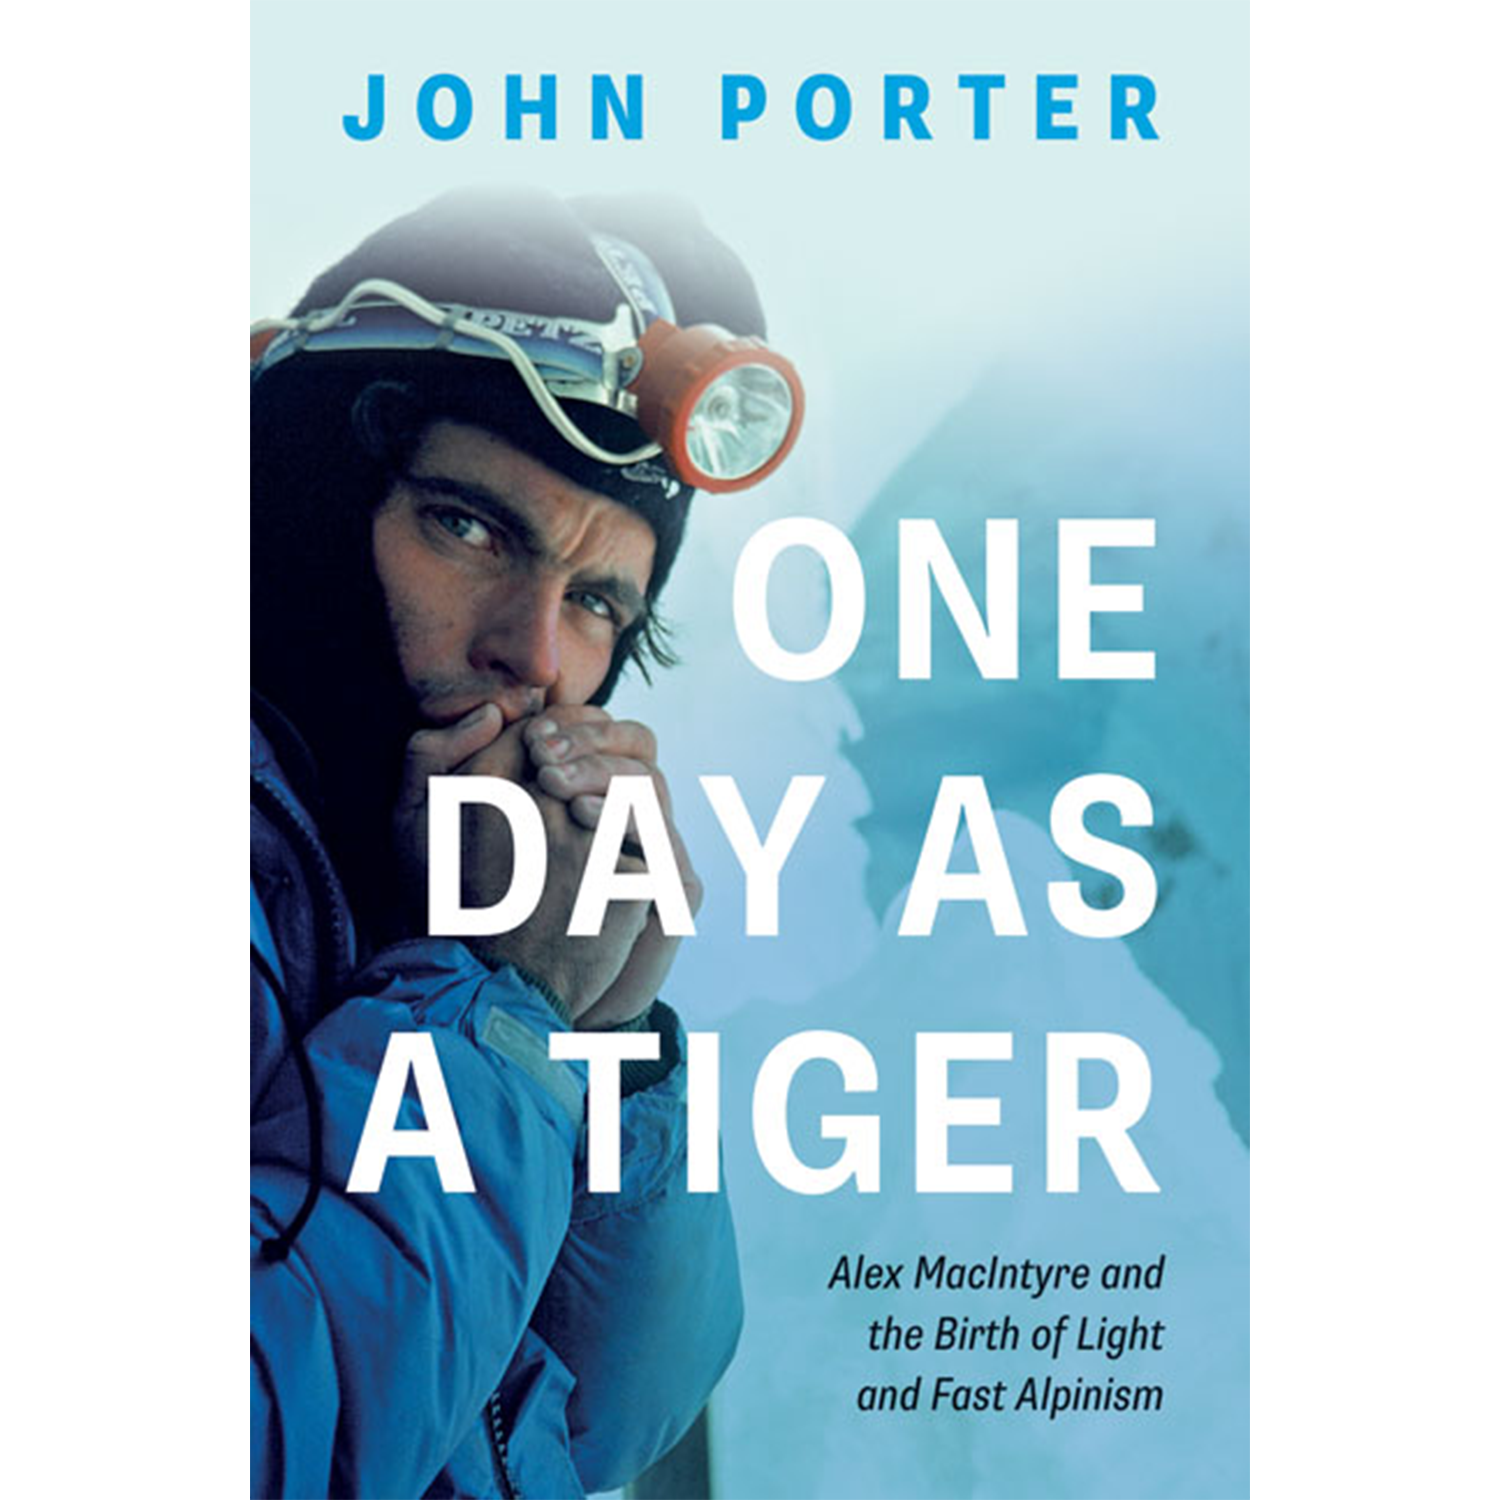 One Day as a Tiger : Alex MacIntyre and the Birth of Light and Fast Alpinism